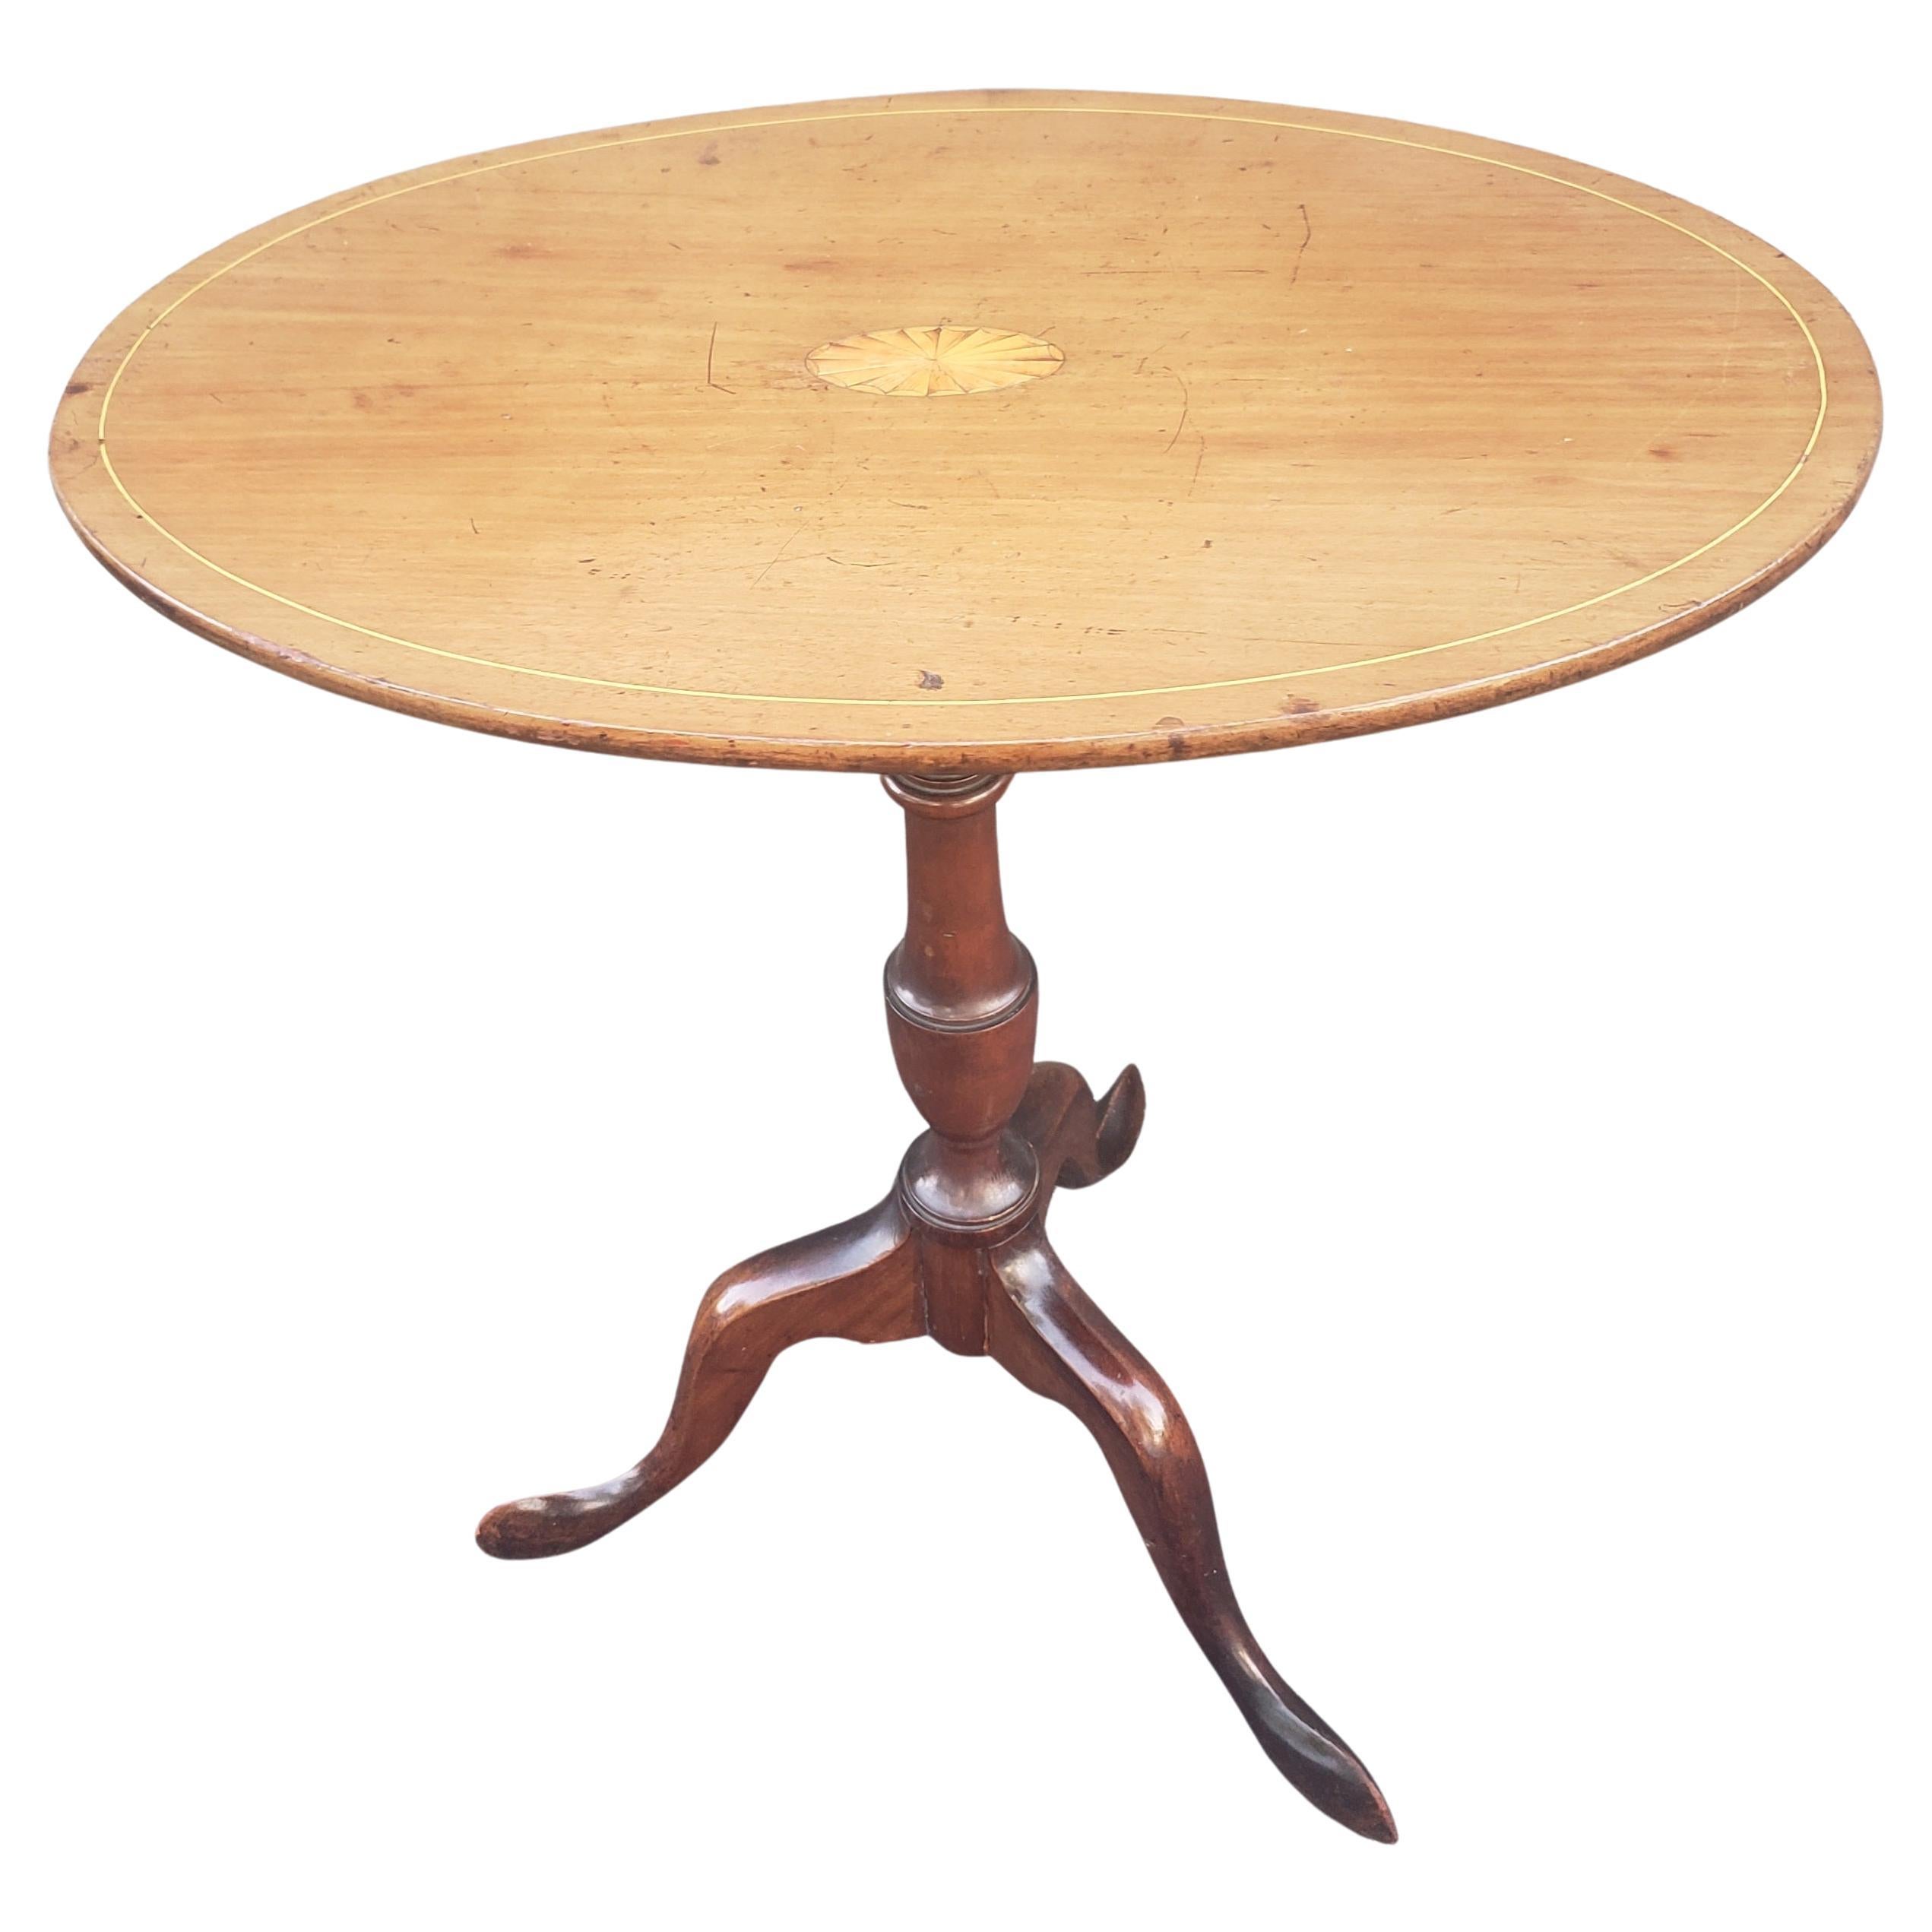 1930s Georgian Mahogany and Satinwood Inlaid Oval Tilt-Top Side Table For Sale 1